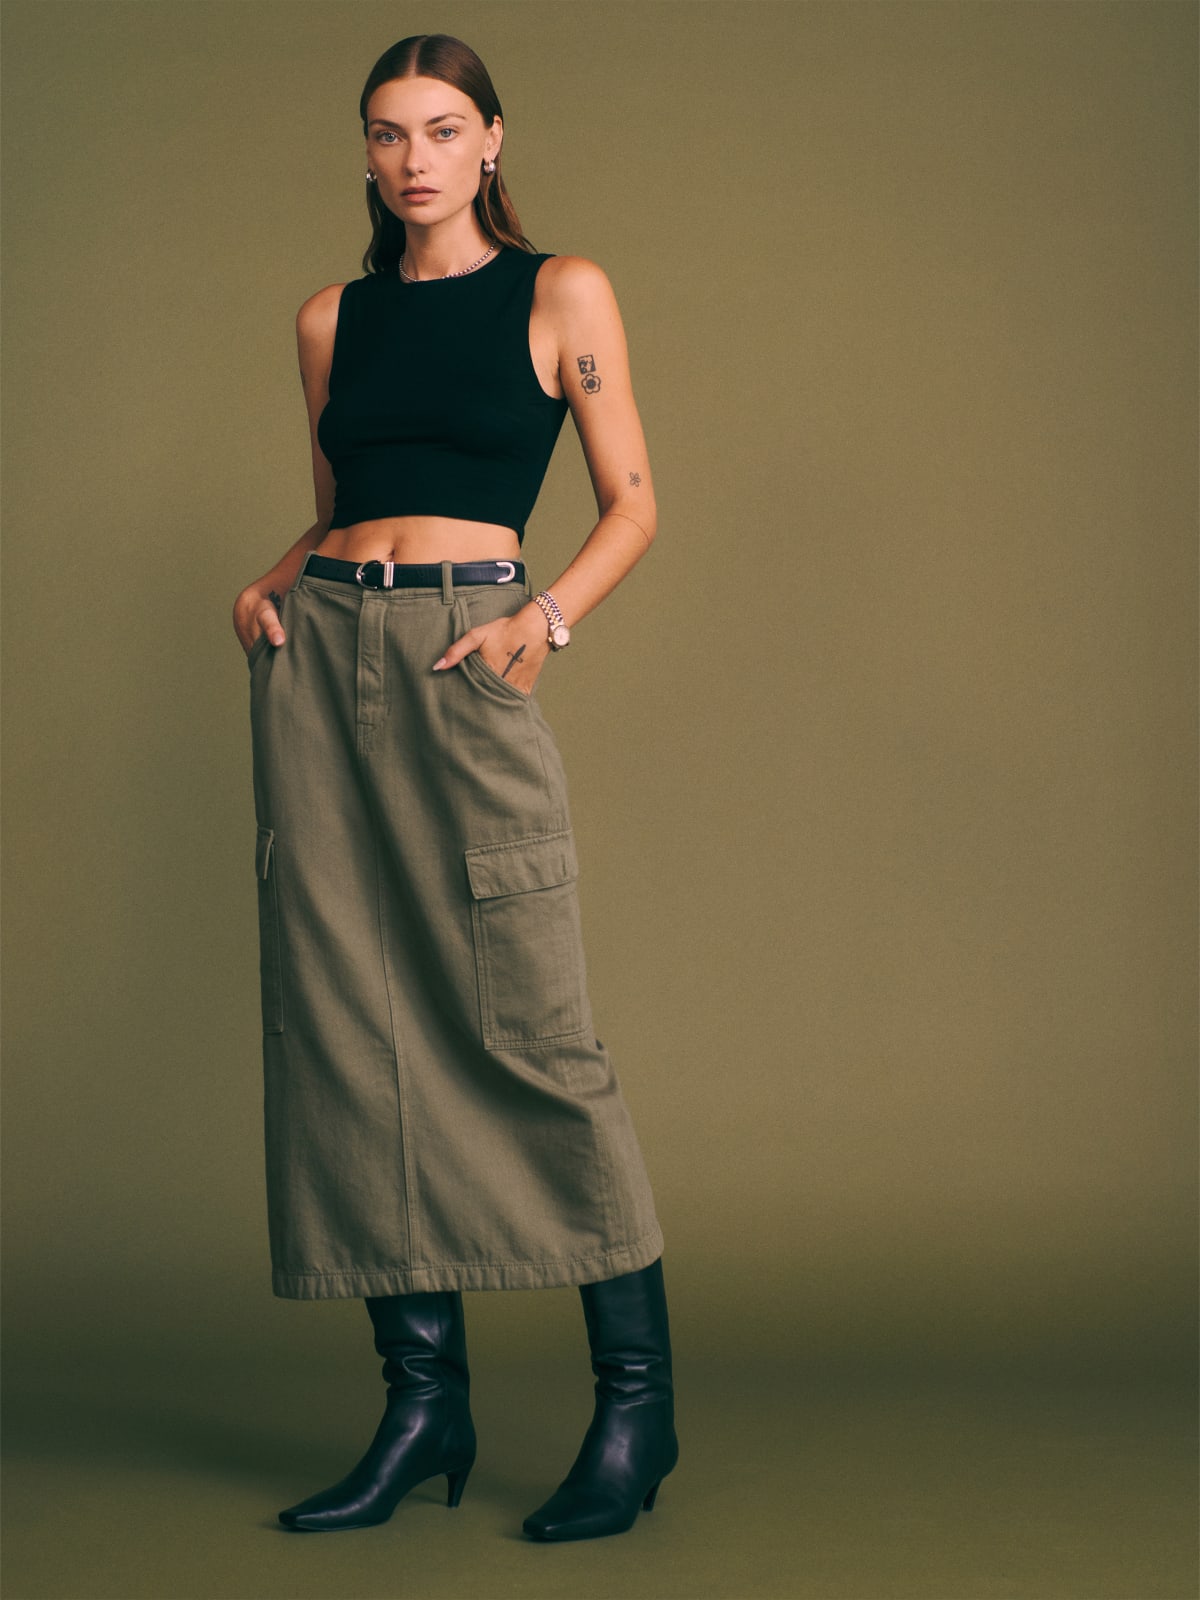 Reformation khaki Maggi cargo midi skirt is a straight fit, cargo skirt and features a front zipper fly, front slash pockets, side cargo pockets, and sits right below the waist.